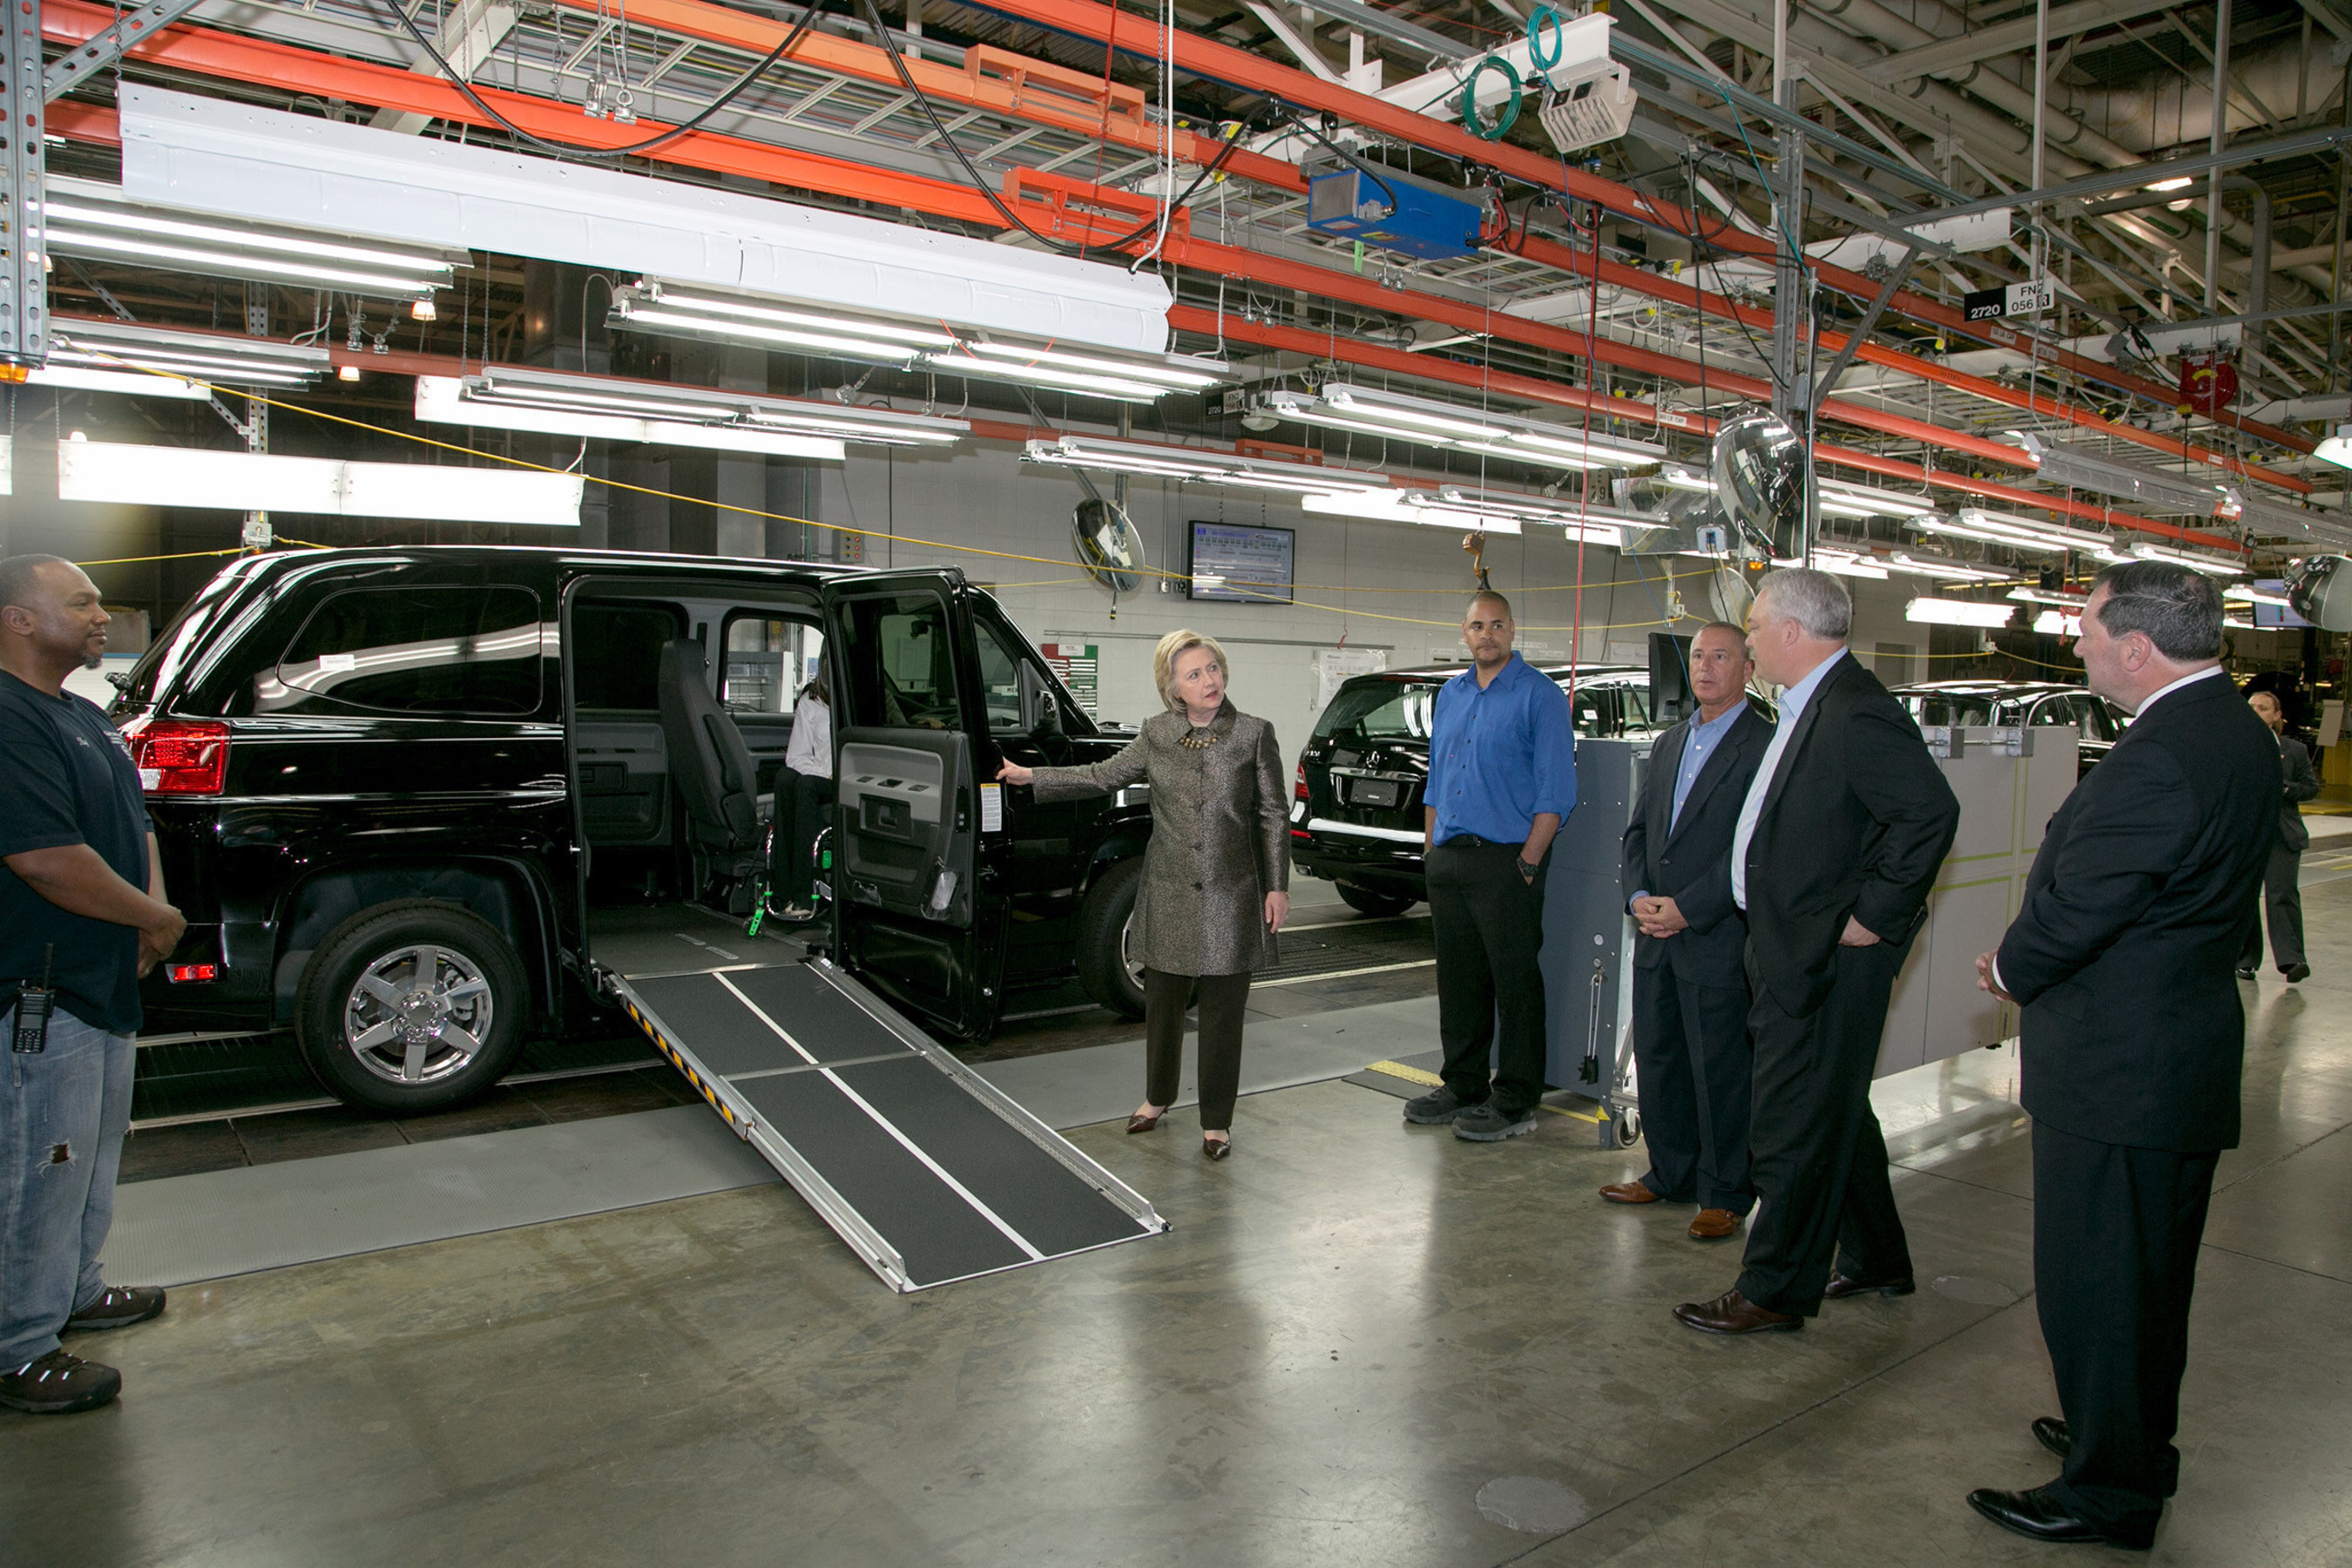 Right to left - (Indiana Sen. Joe Donnelly AM General President and CEO, Andy Hove, AM General, Commercial President, Howard Glaser and Mrs. Clinton.)Upon seeing a demonstration of the MV-1 vehicle by Mobility Ventures employee, and former Ms. Wheelchair America, Erika Bogan, Mrs. Clinton commented later to a gathered crowd, "I want to thank you for coming up with the MV-1. What a remarkable invention, providing dignity, mobility to people with disabilities. I am thrilled that I got to see that."